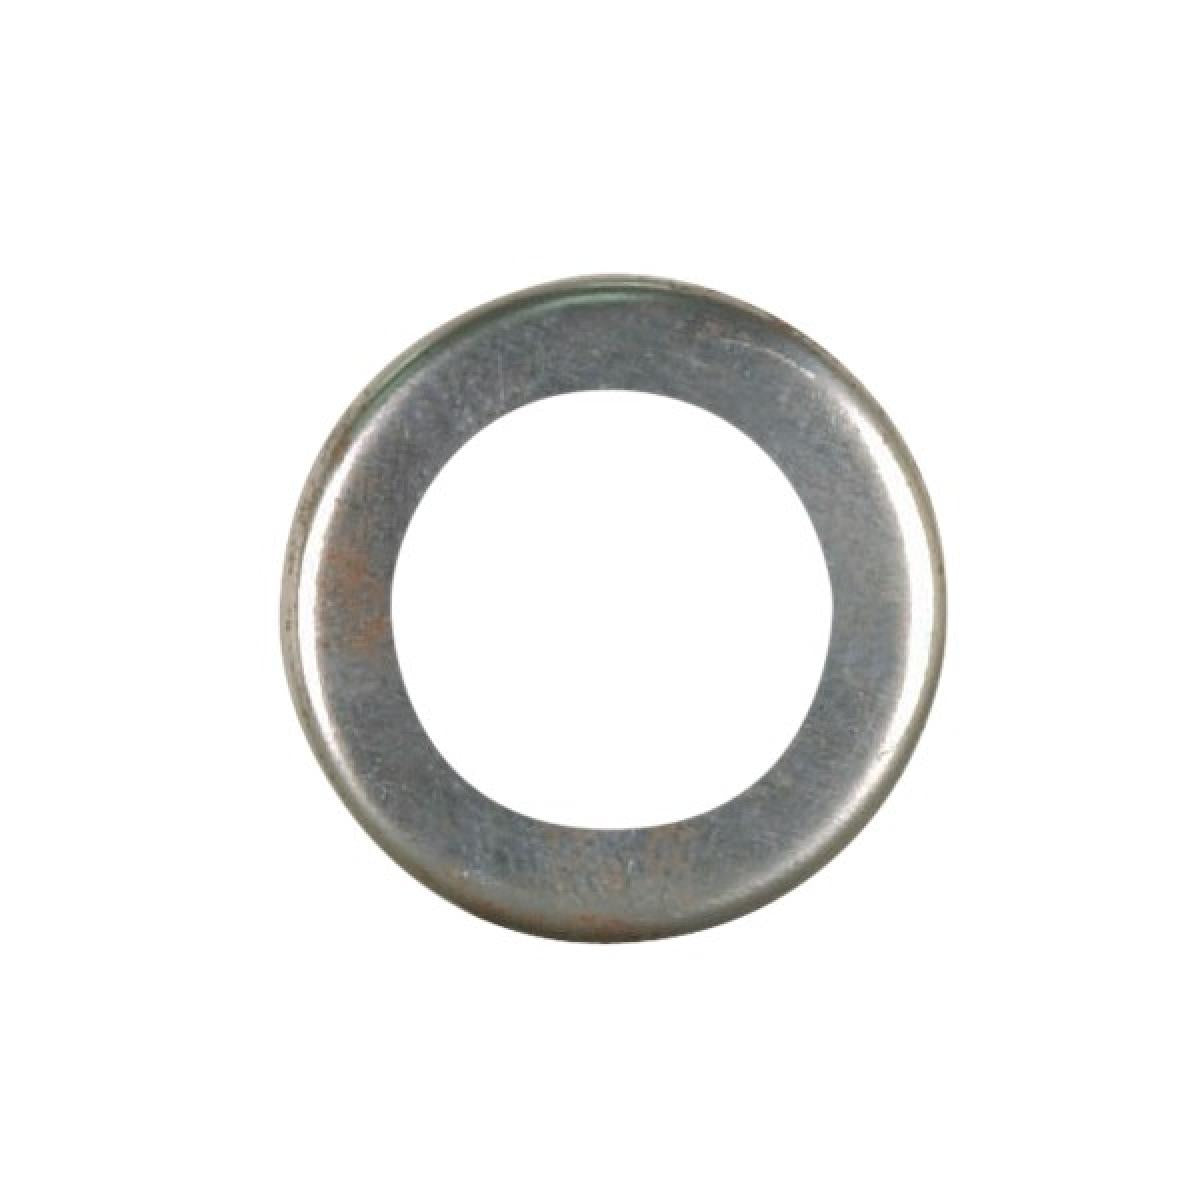 Satco 90-2090 Steel Check Ring Curled Edge 1/4 IP Slip Unfinished 1-1/2" Diameter